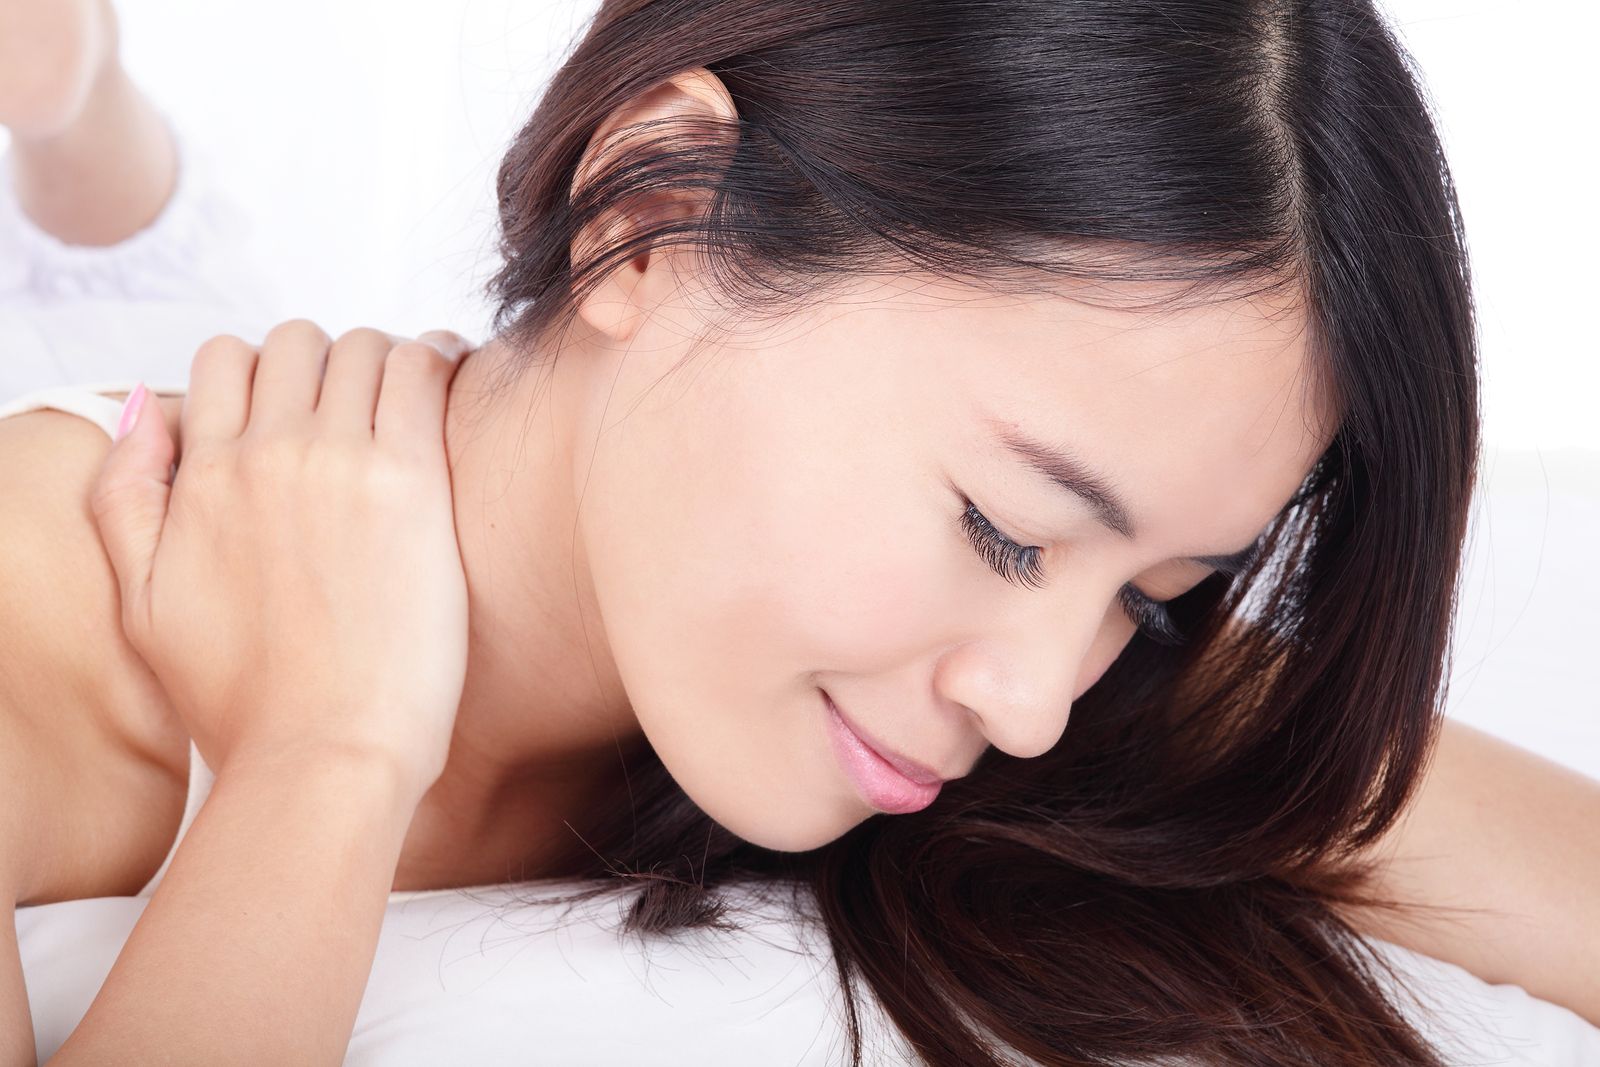 Relaxed woman after chiropractic care